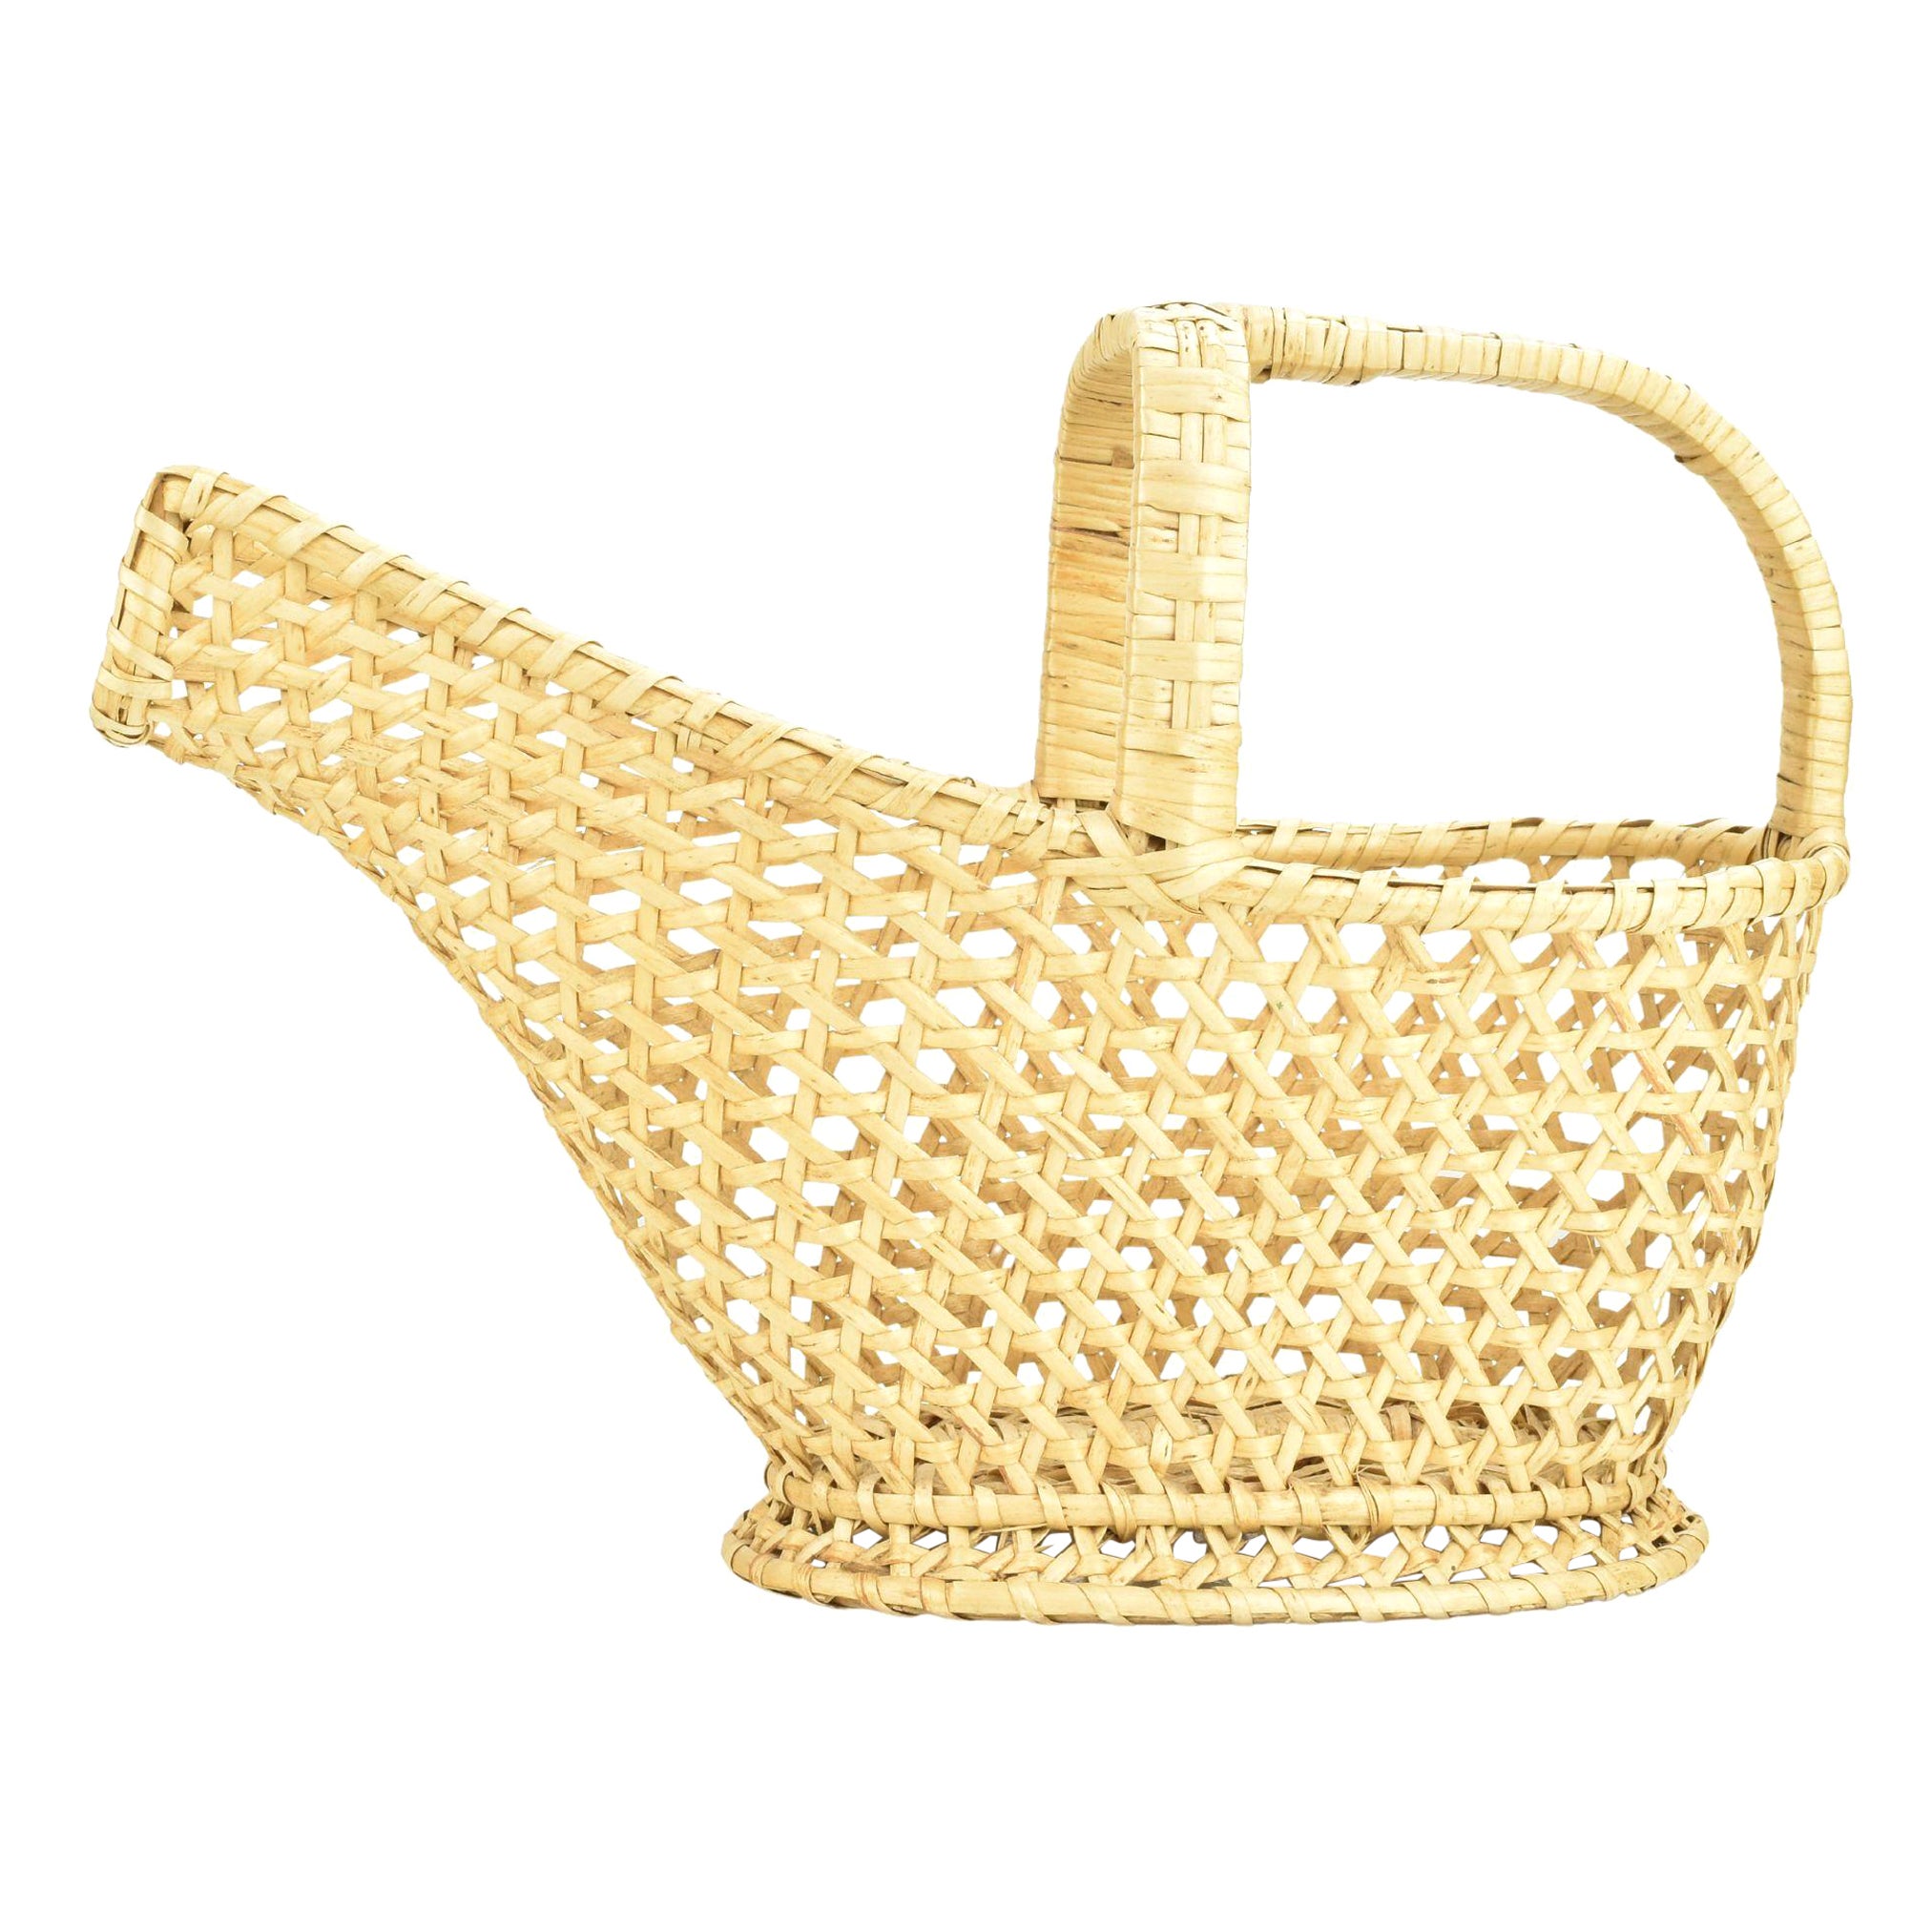 French Wicker Rattan Cane Wine Bottle Holder Caddy Mid Century 1960s For Sale